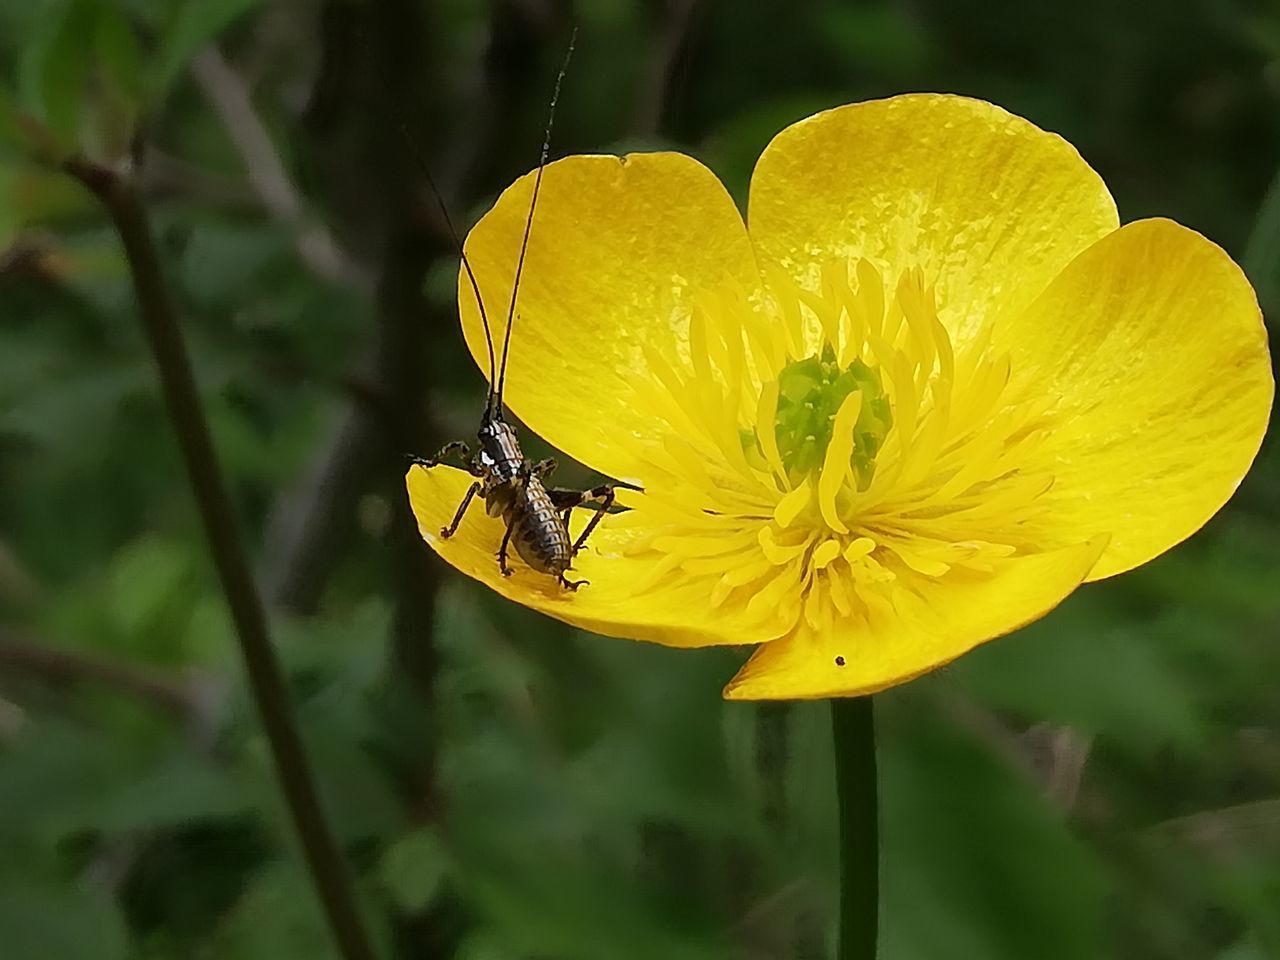 CLOSE-UP OF INSECT POLLINATING ON FLOWER